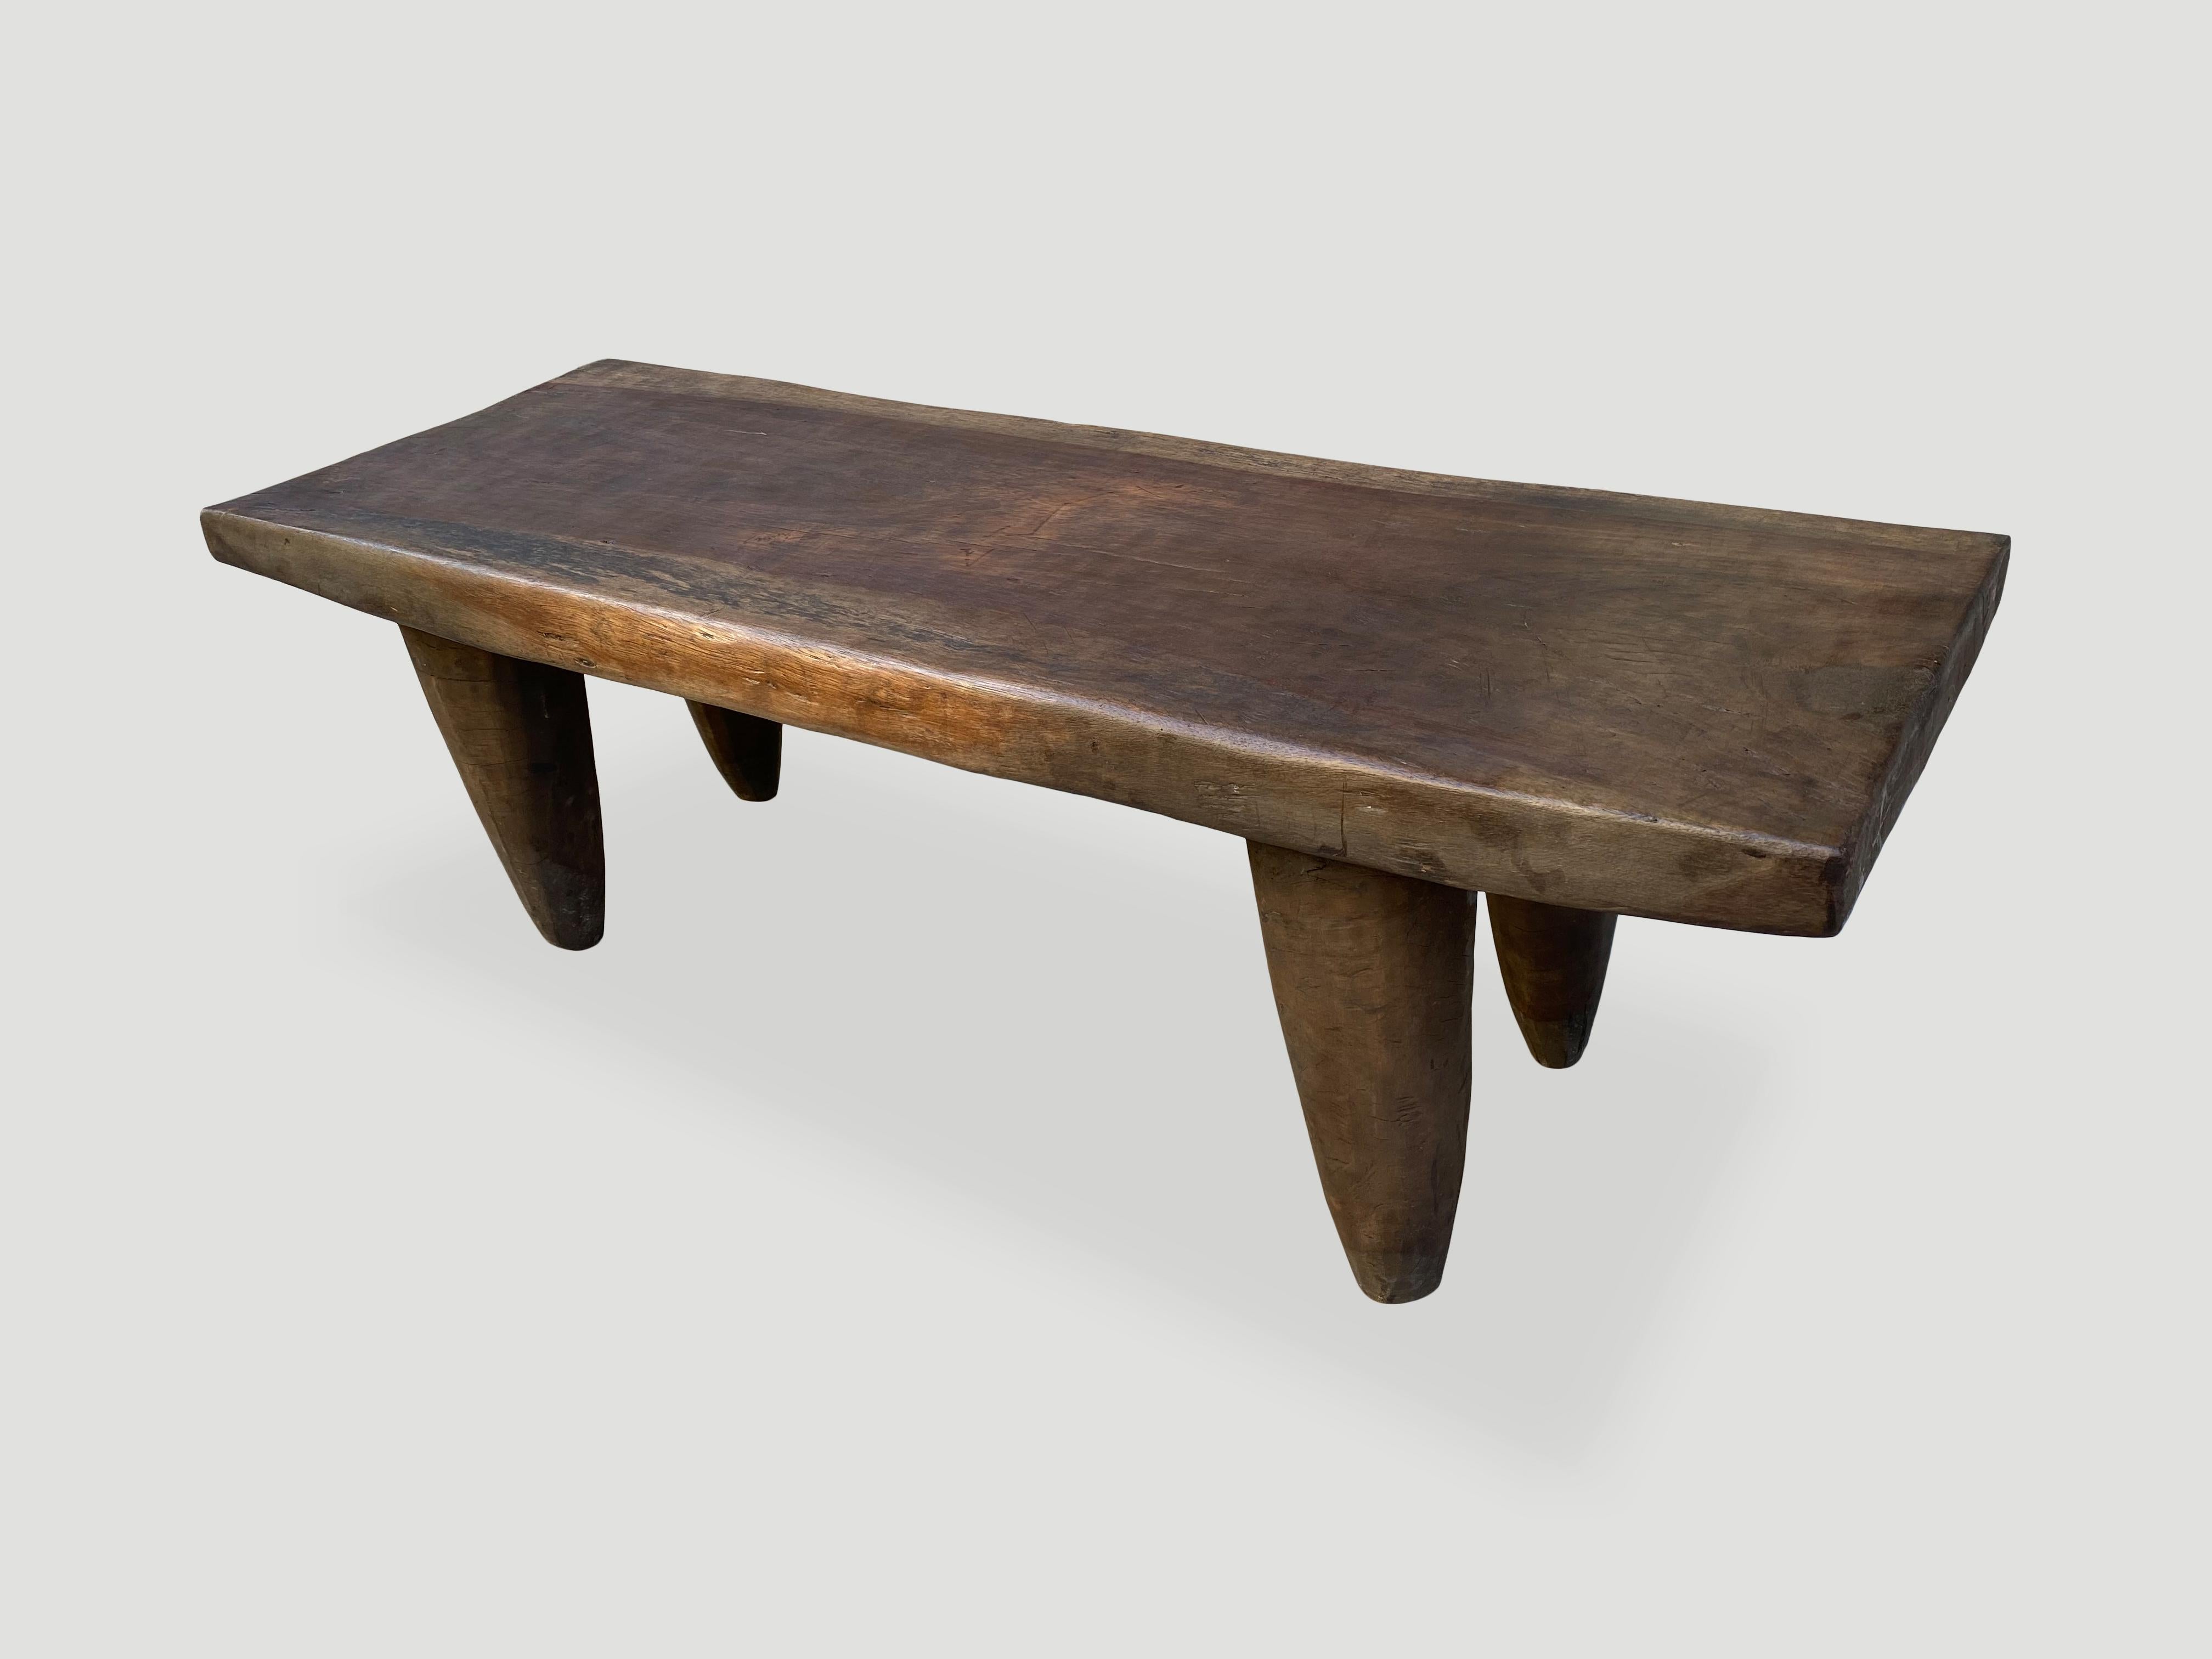 Antique coffee table or bench hand carved by the Senufo tribes from a single block of iroko wood, native to the west coast of Africa. The wood is tough, dense and very durable. Shown with cone style legs and with a two inch thick top. Beautiful tone